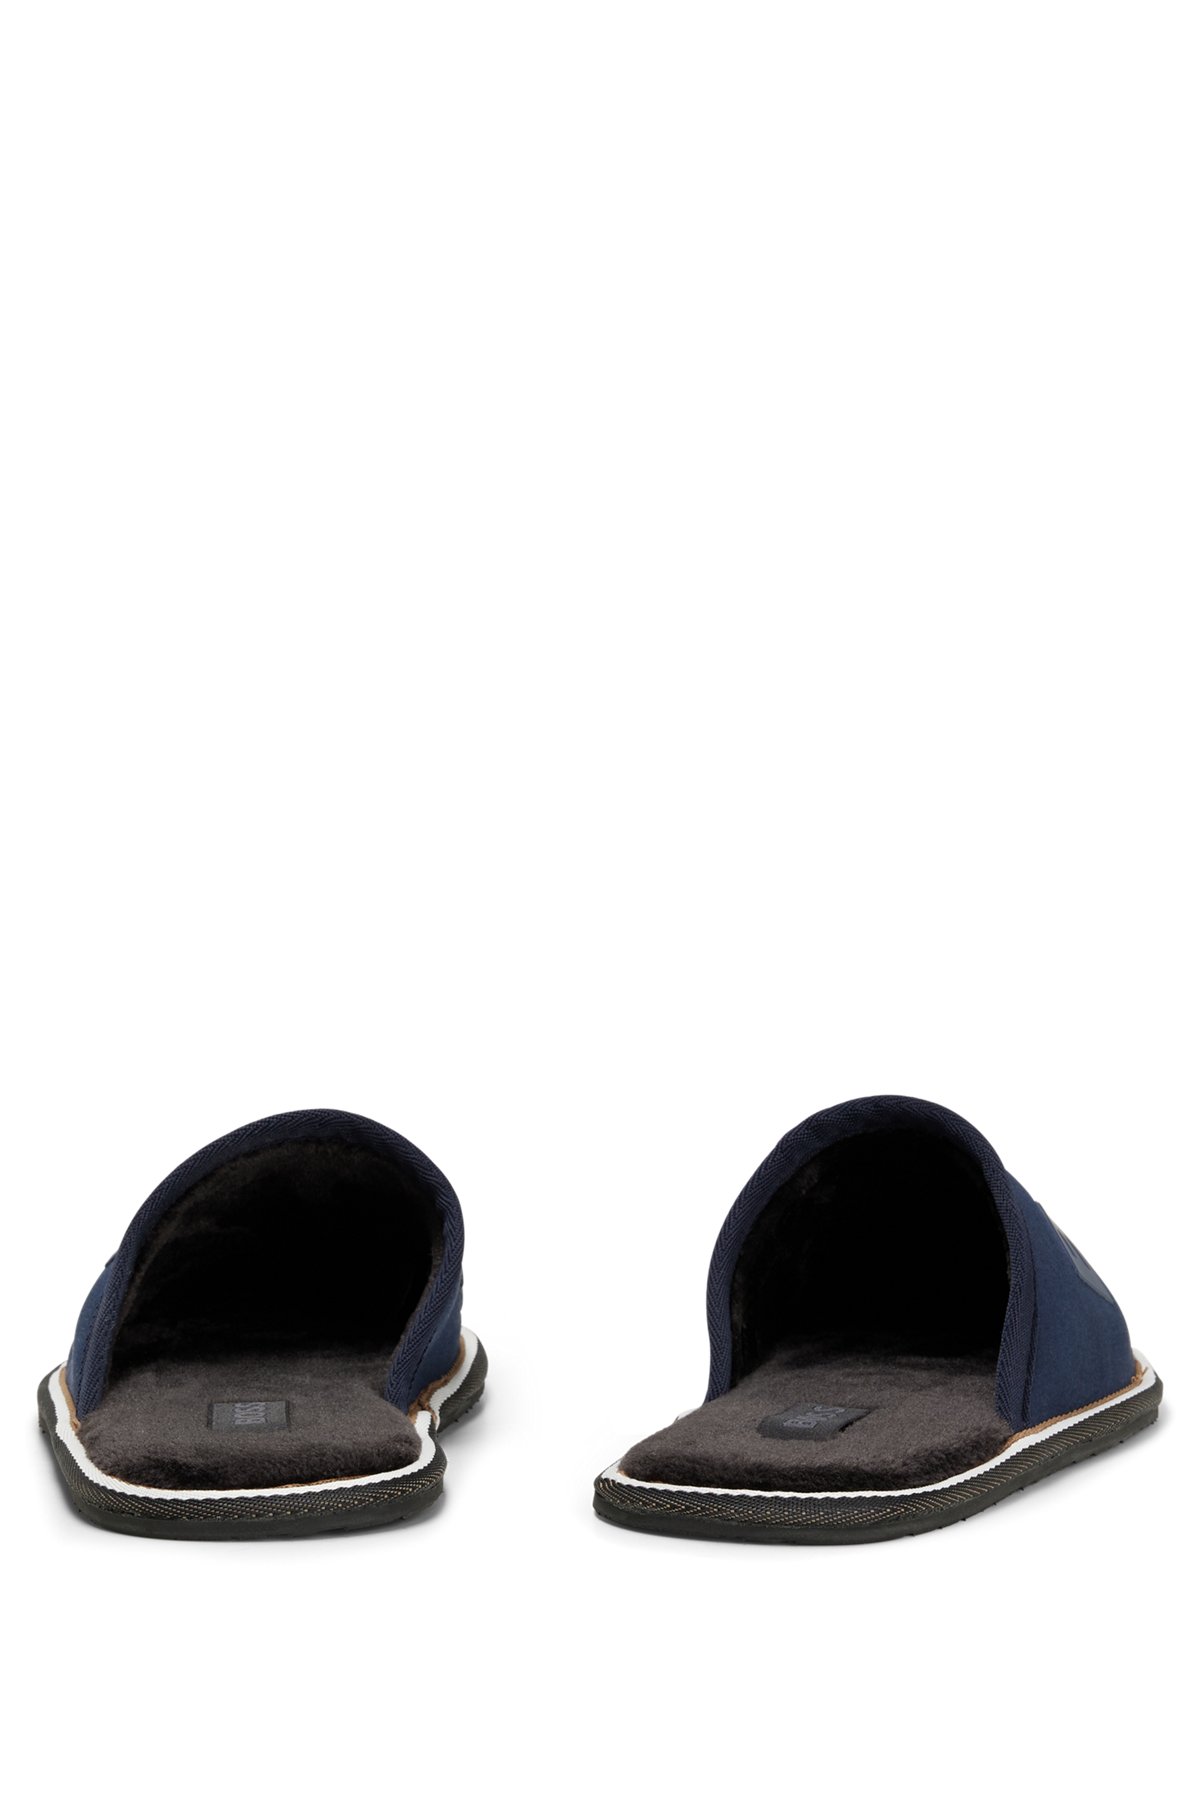 Monogram-logo slippers with rubber outsole and signature stripe, Dark Blue